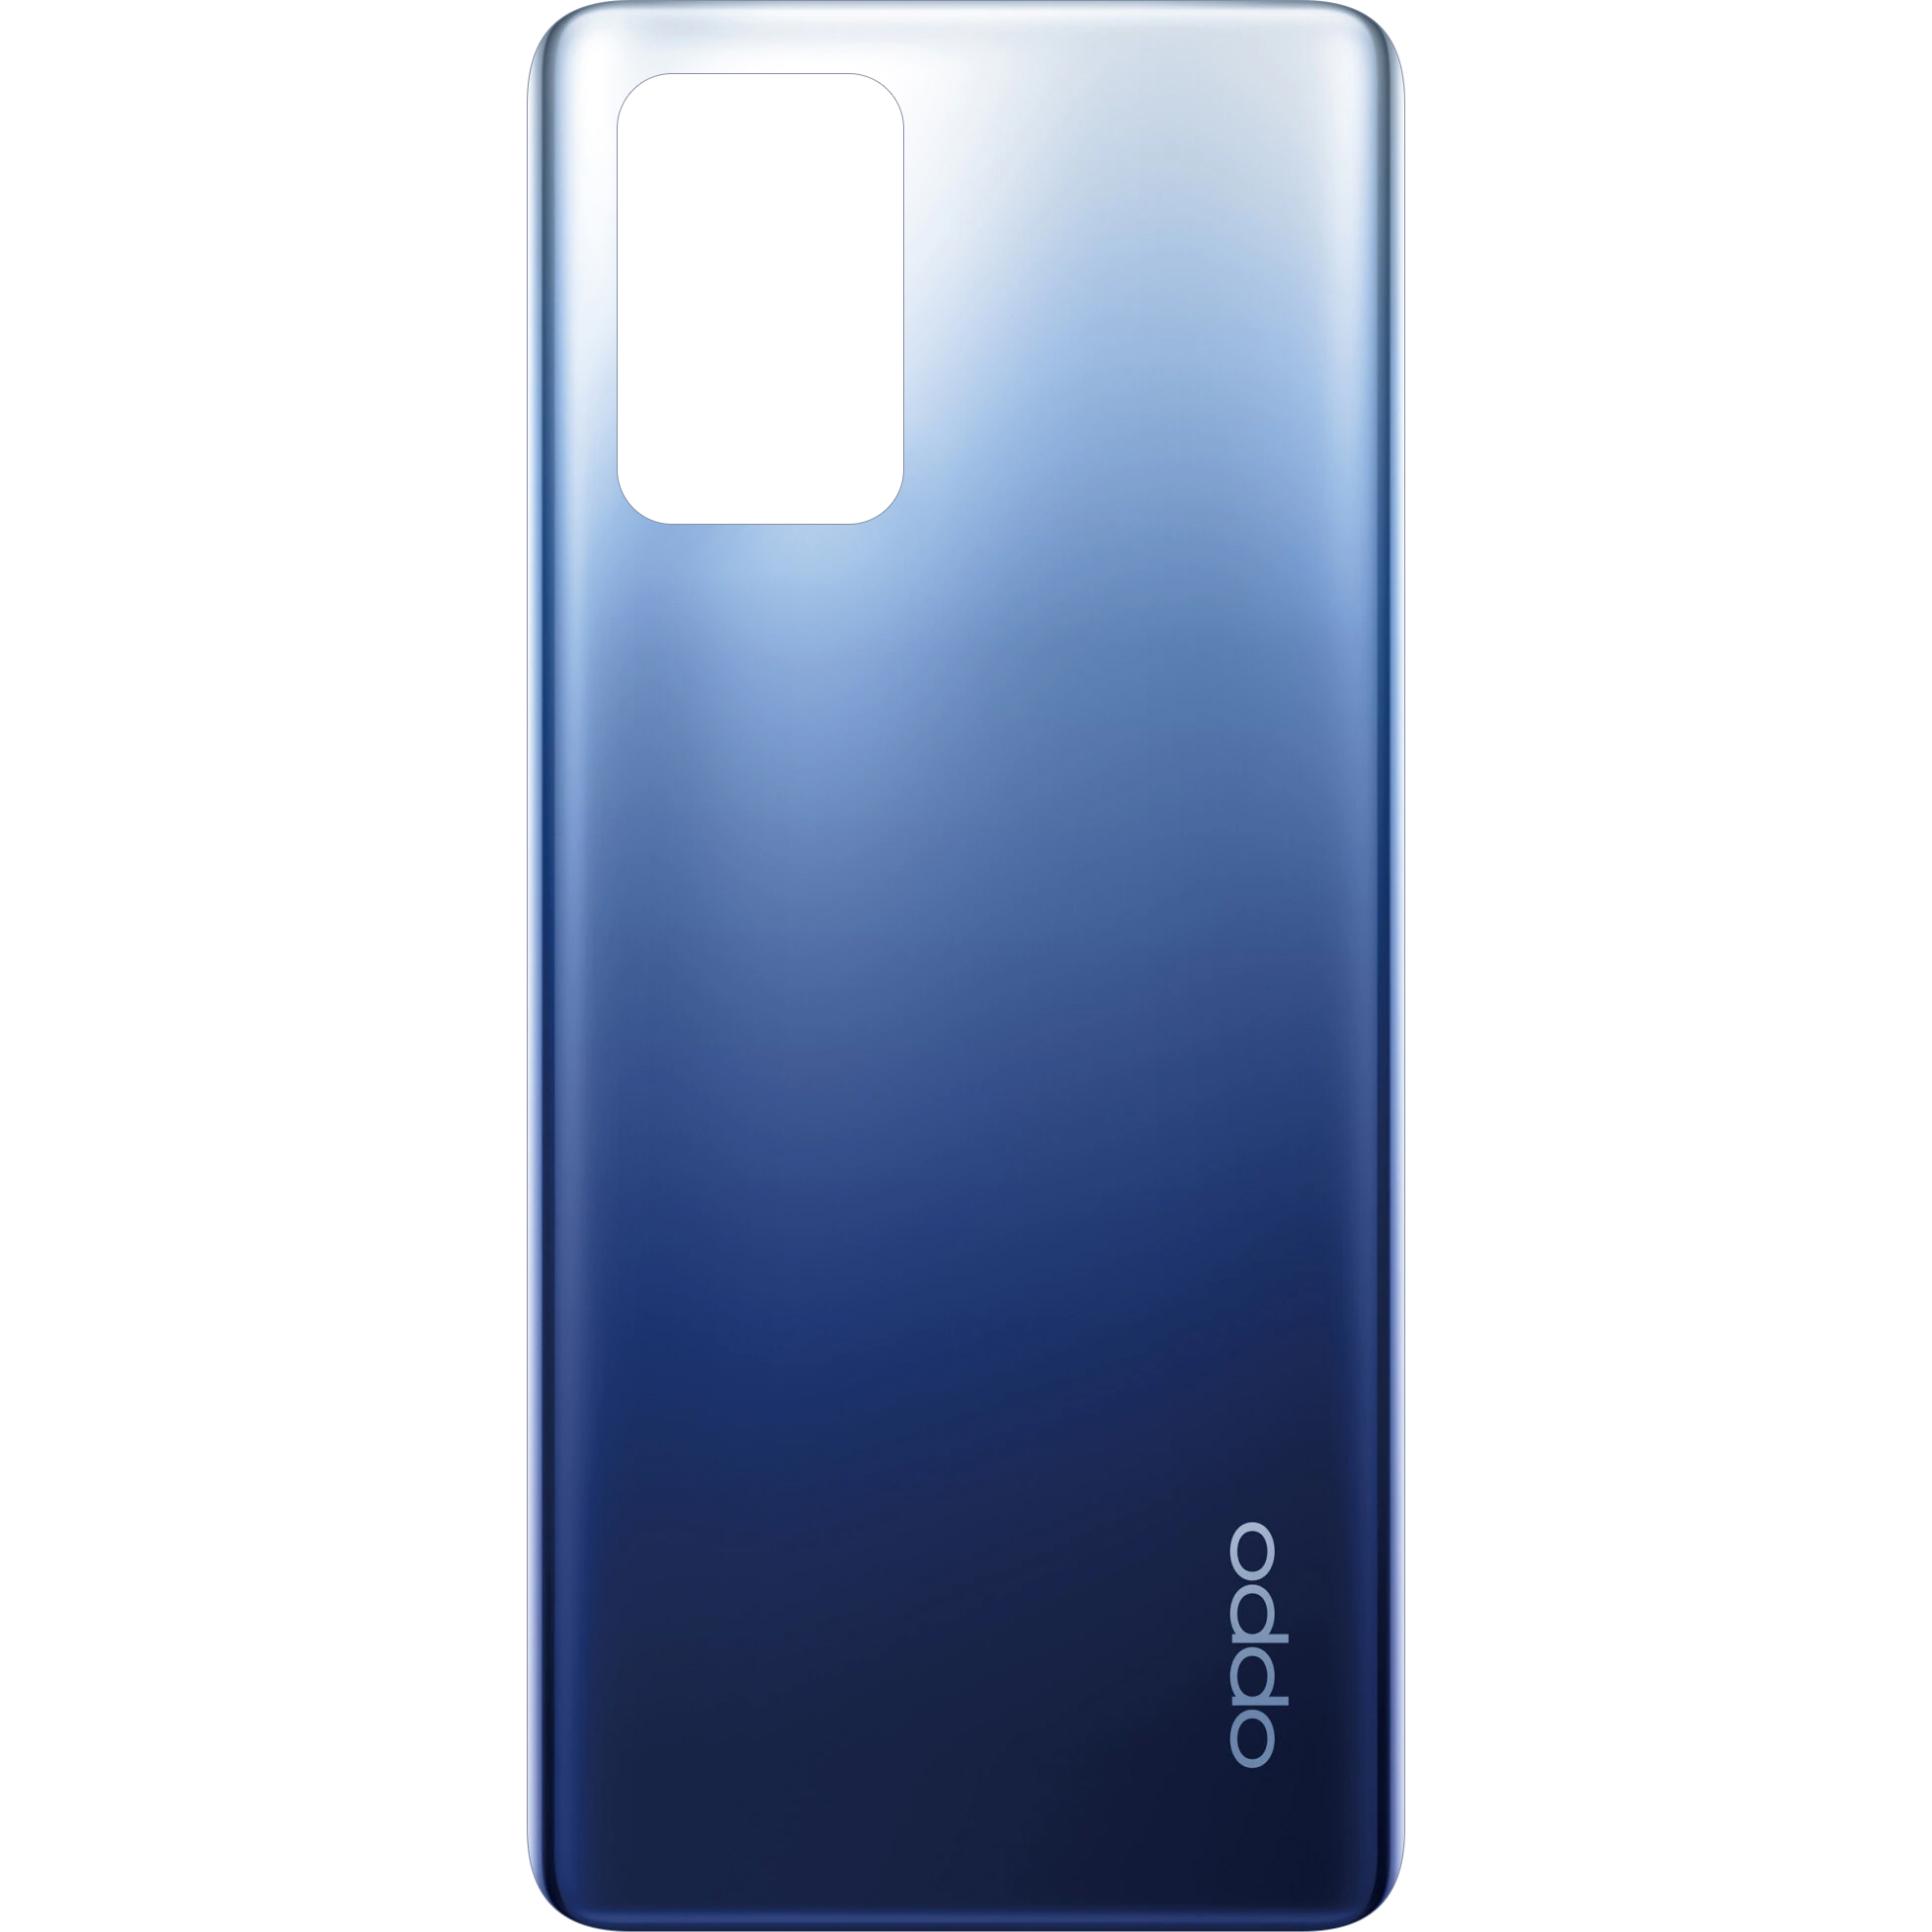 capac-baterie-oppo-a74-2C-bleumarin--28midnight-blue-29-2C-service-pack-3202502-